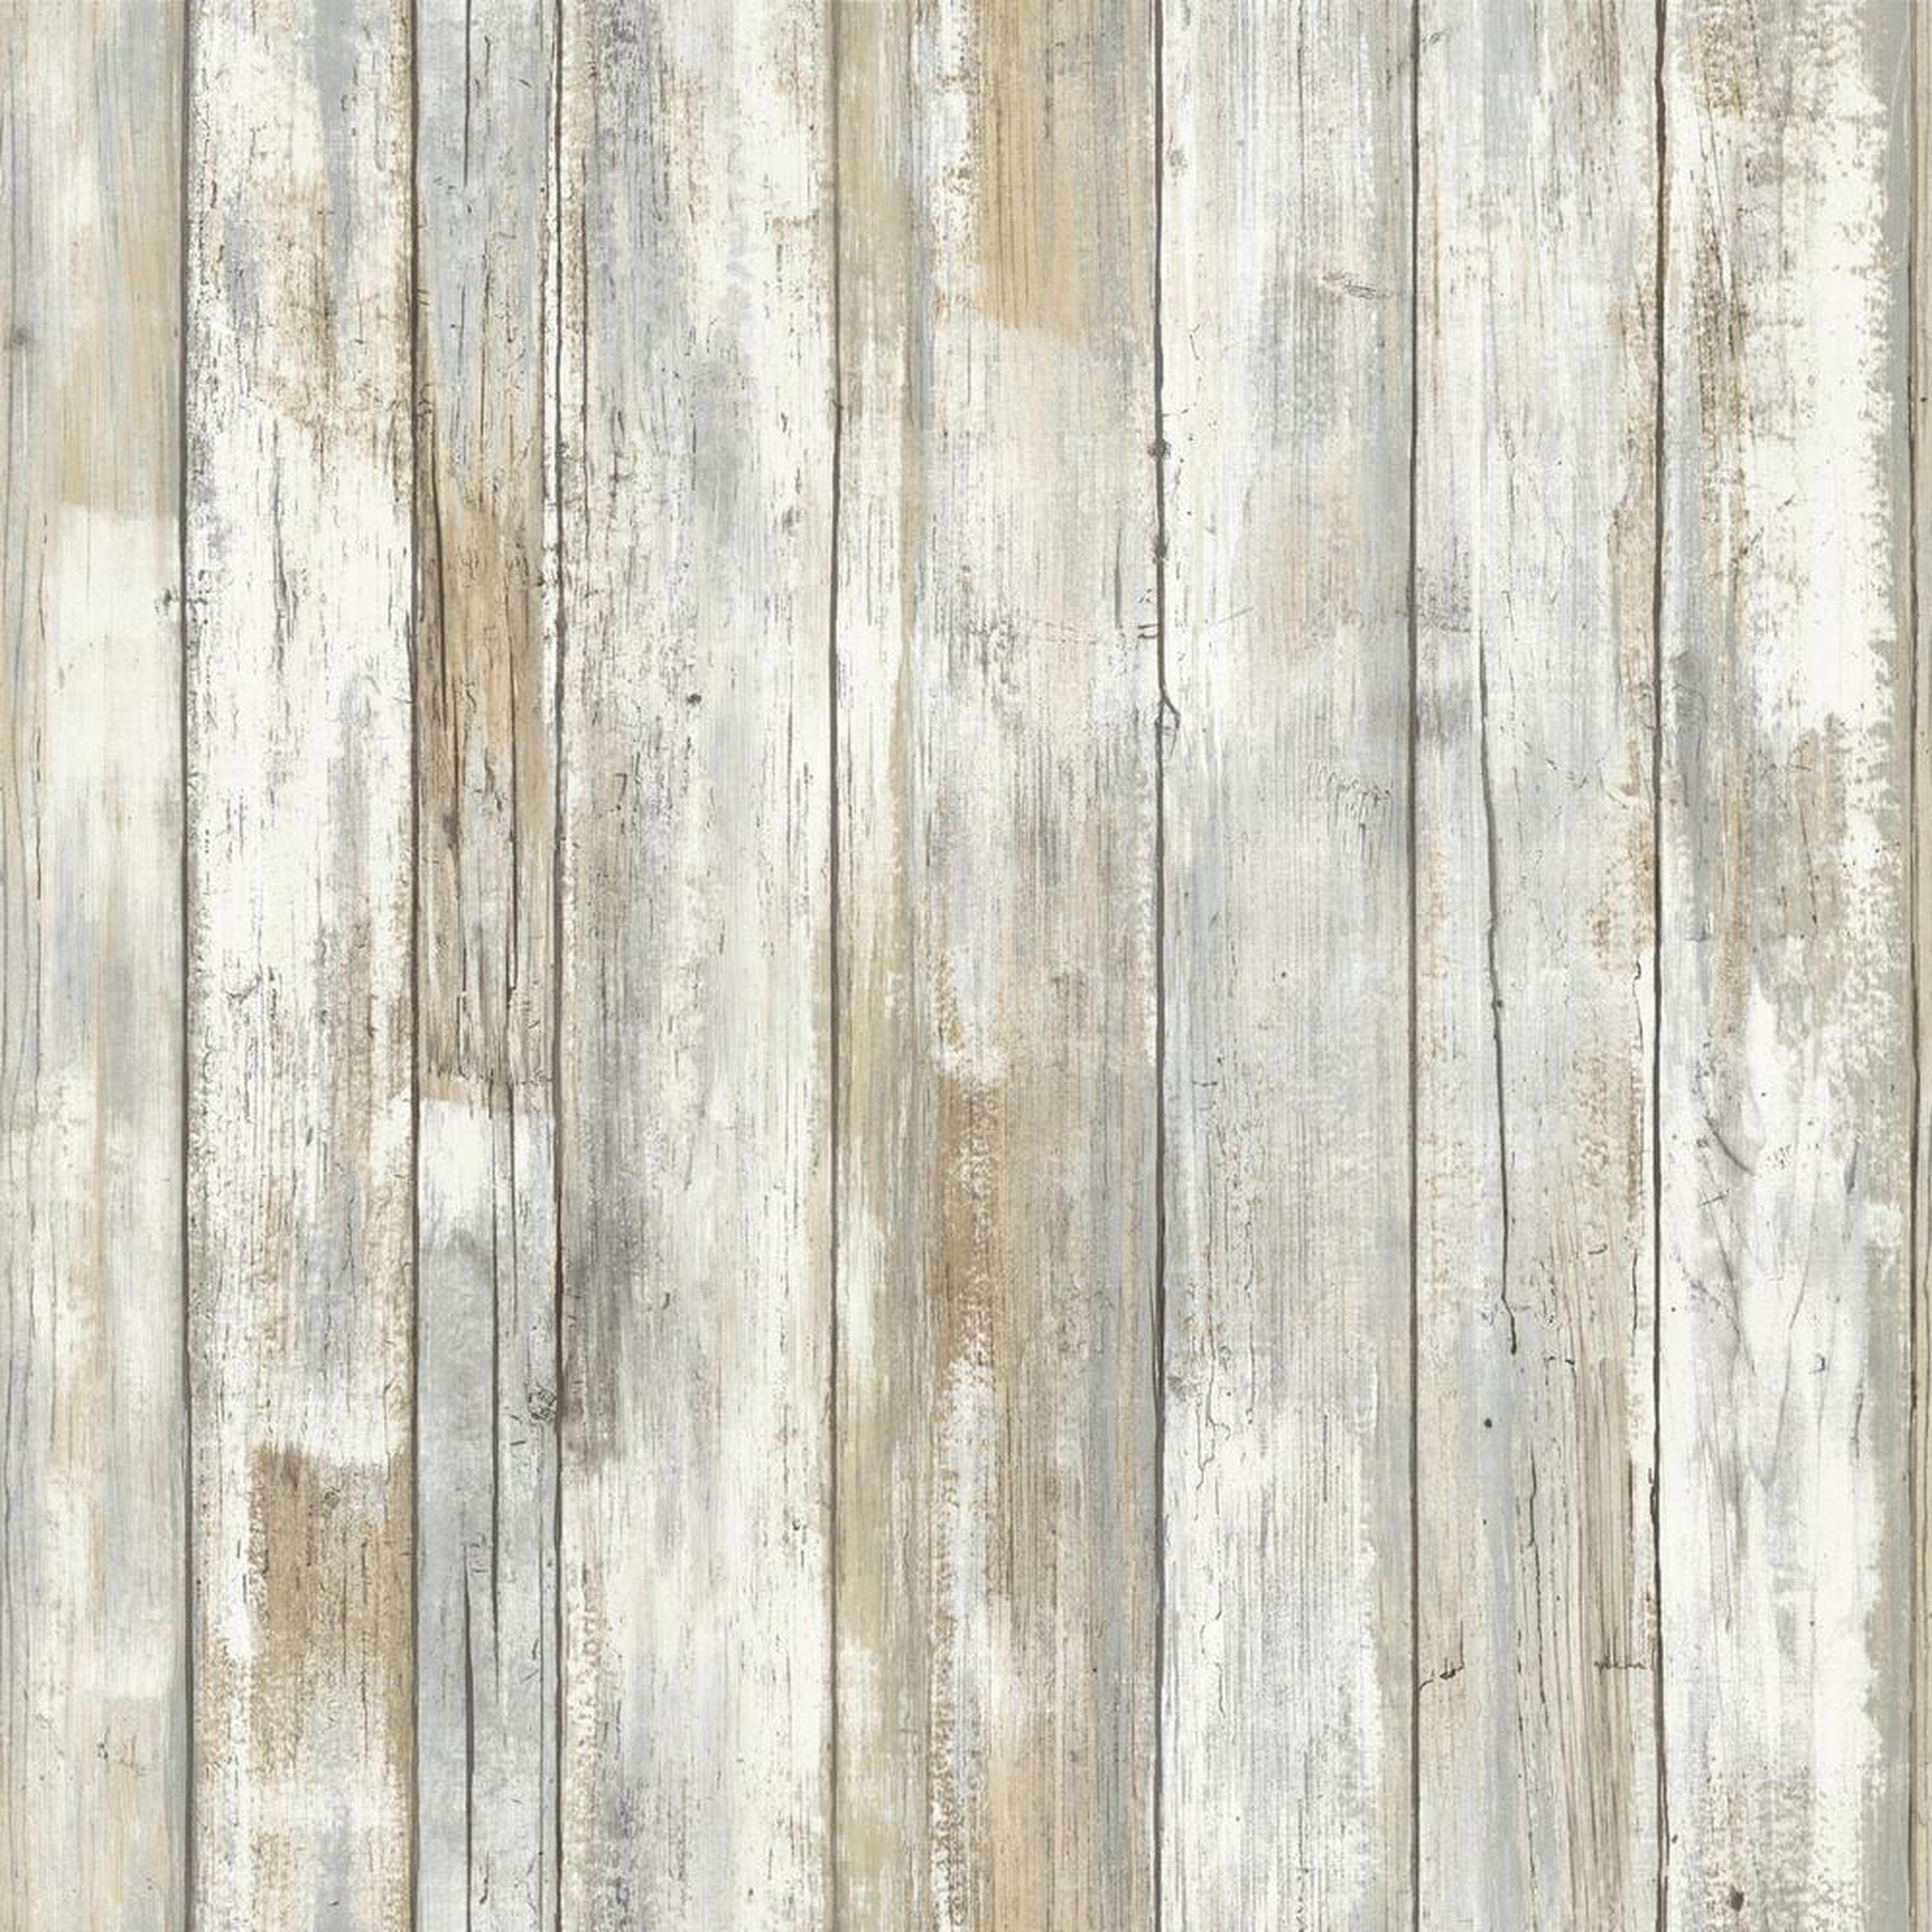 28.18 sq. ft. Distressed Wood Peel and Stick Wallpaper, White - Home Depot